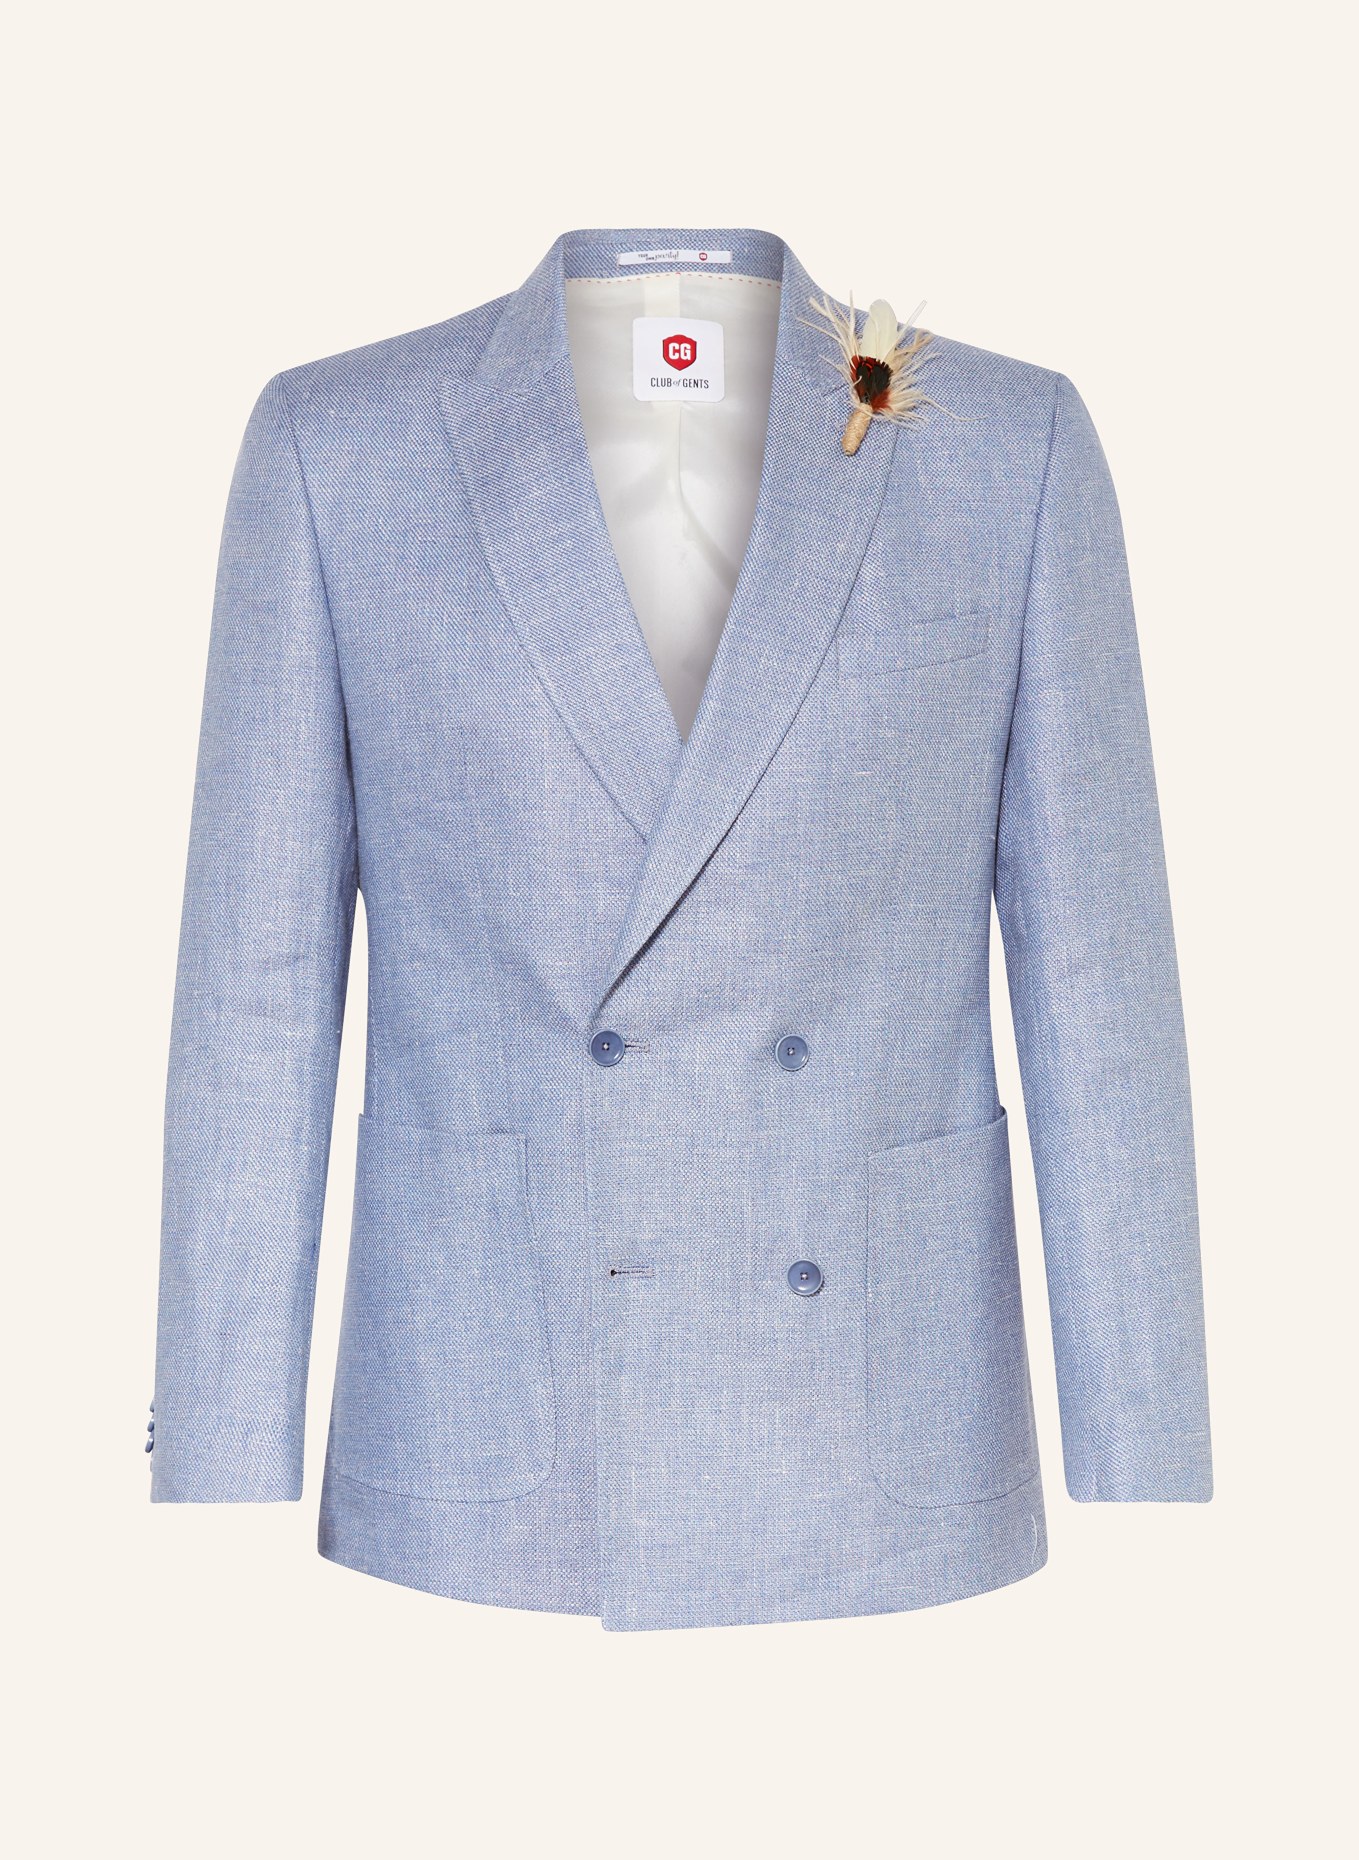 CG - CLUB of GENTS Suit jacket CG PERO slim fit with linen, Color: 61 BLAU HELL (Image 1)